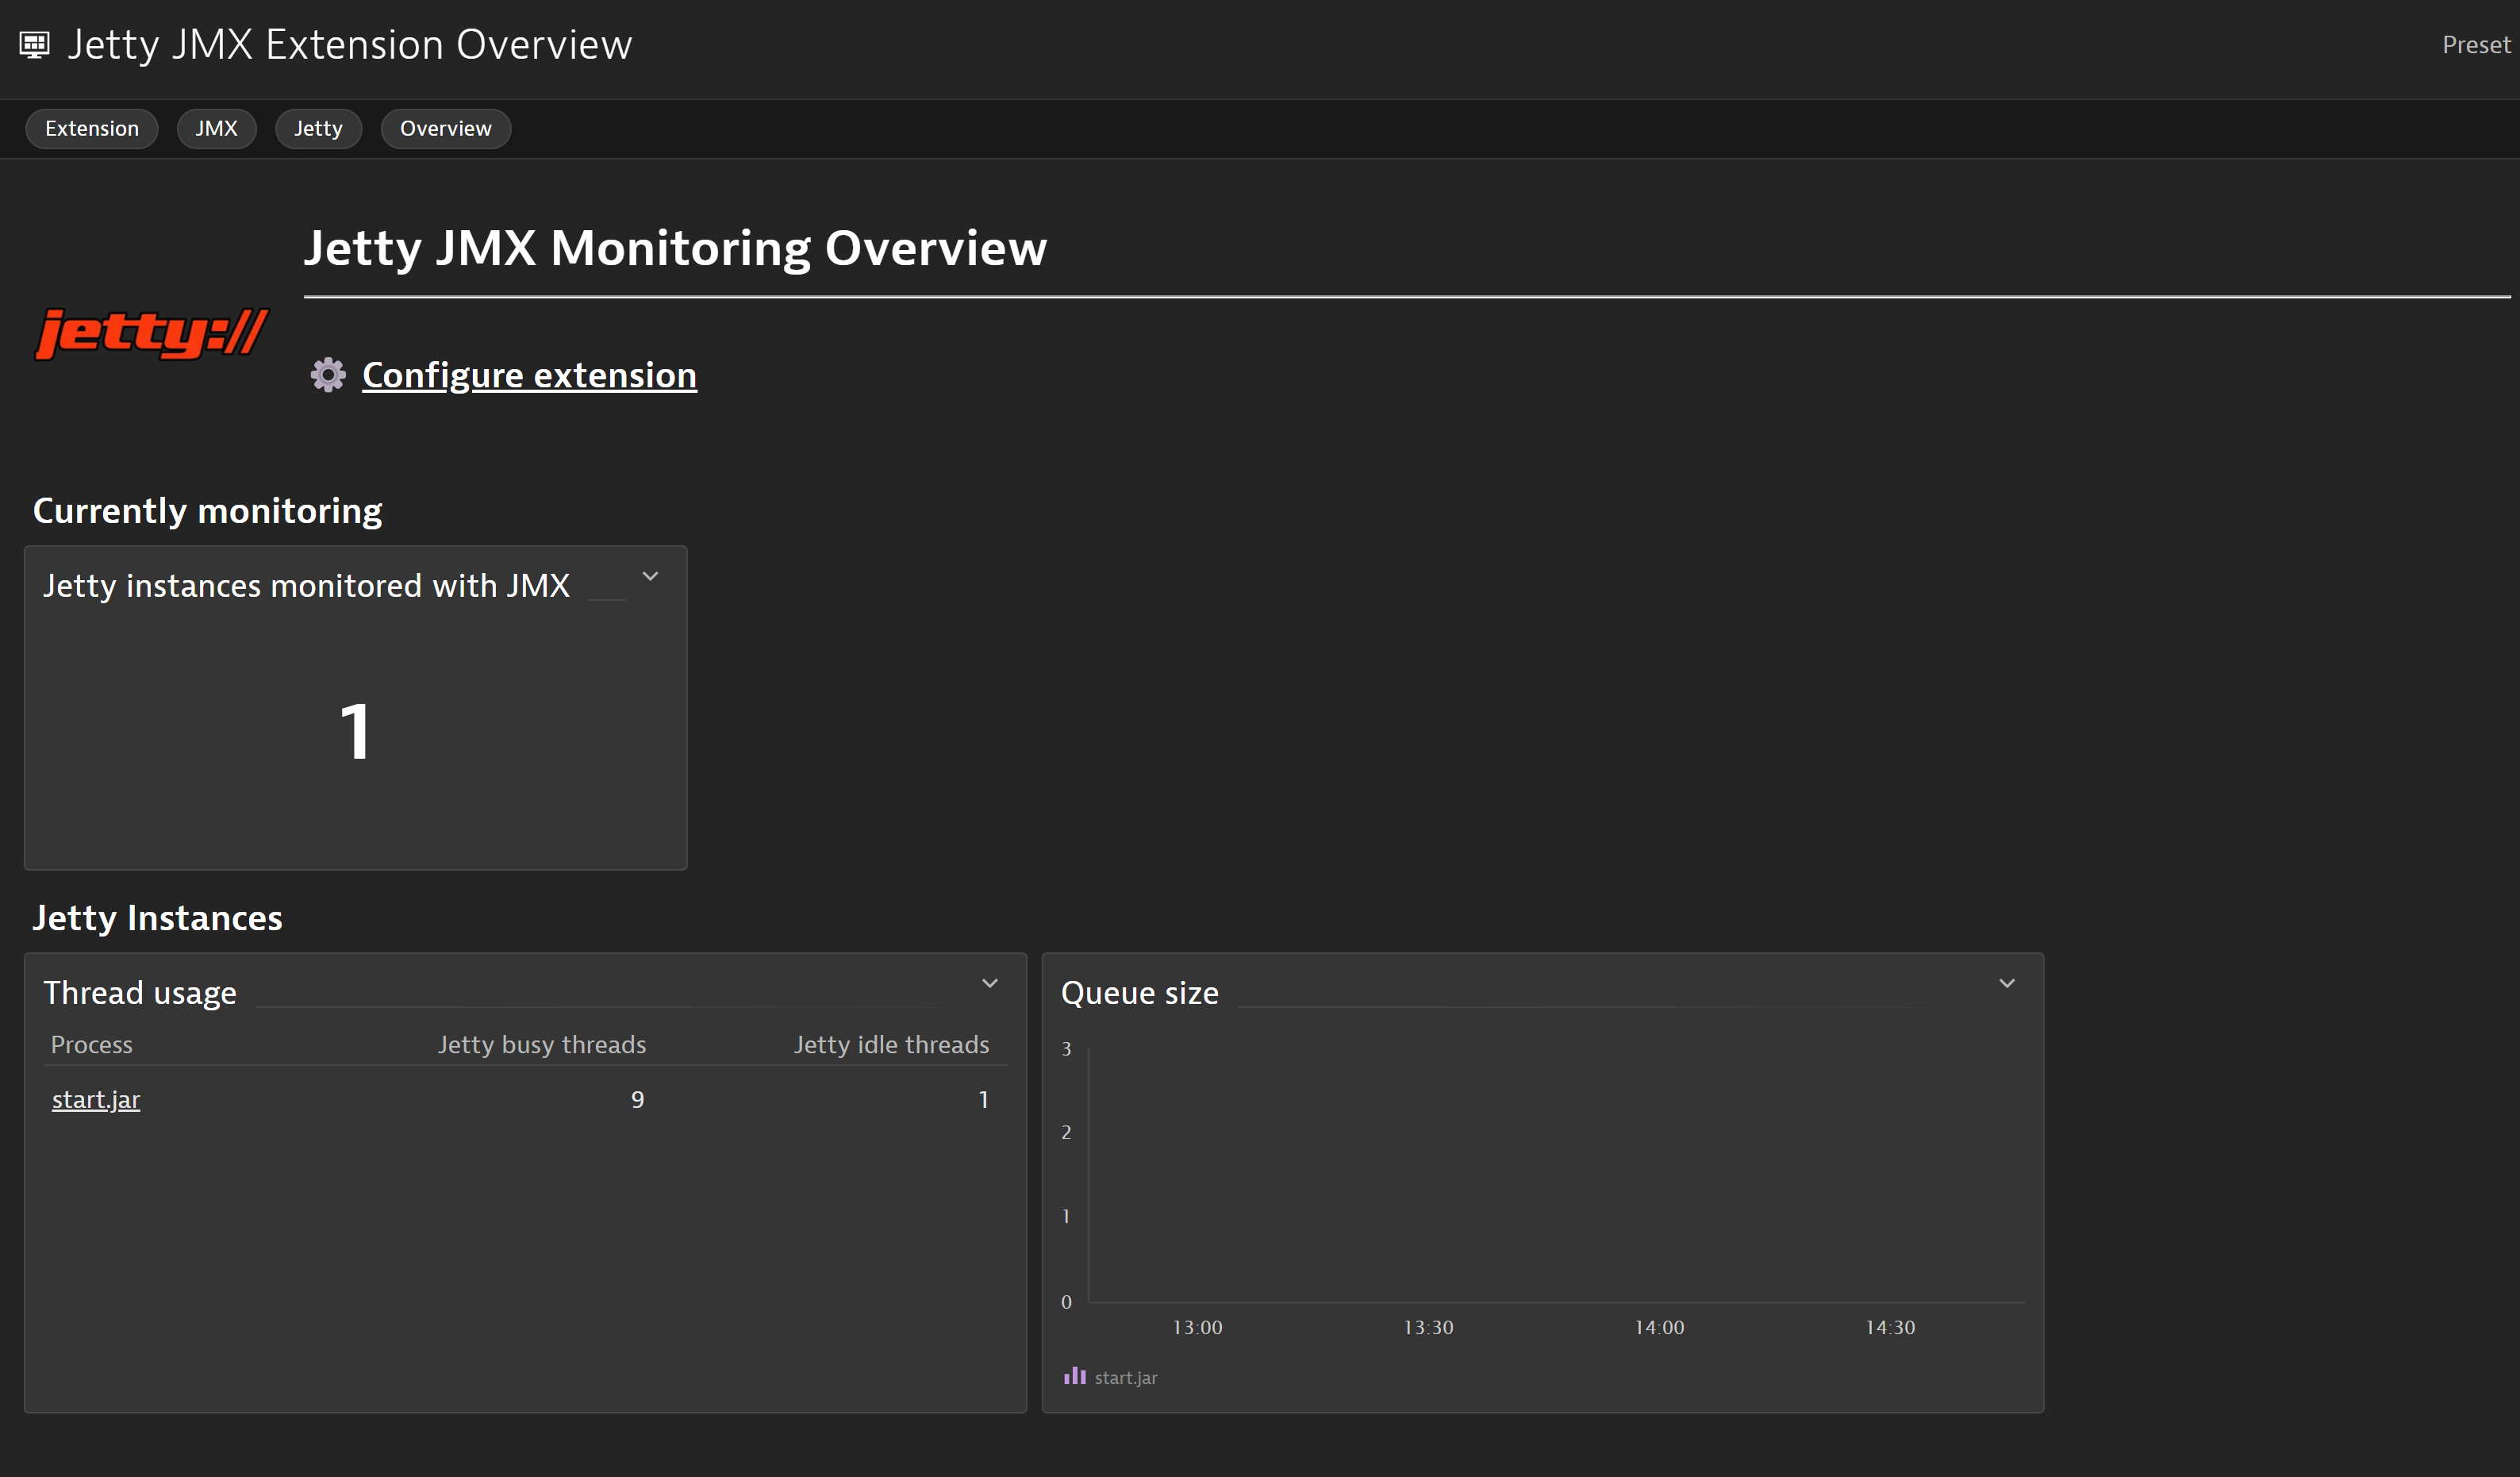 Quickly access and analyze your Jetty applications and their related metrics through the included Overview dashboard for Jetty JMX metrics.